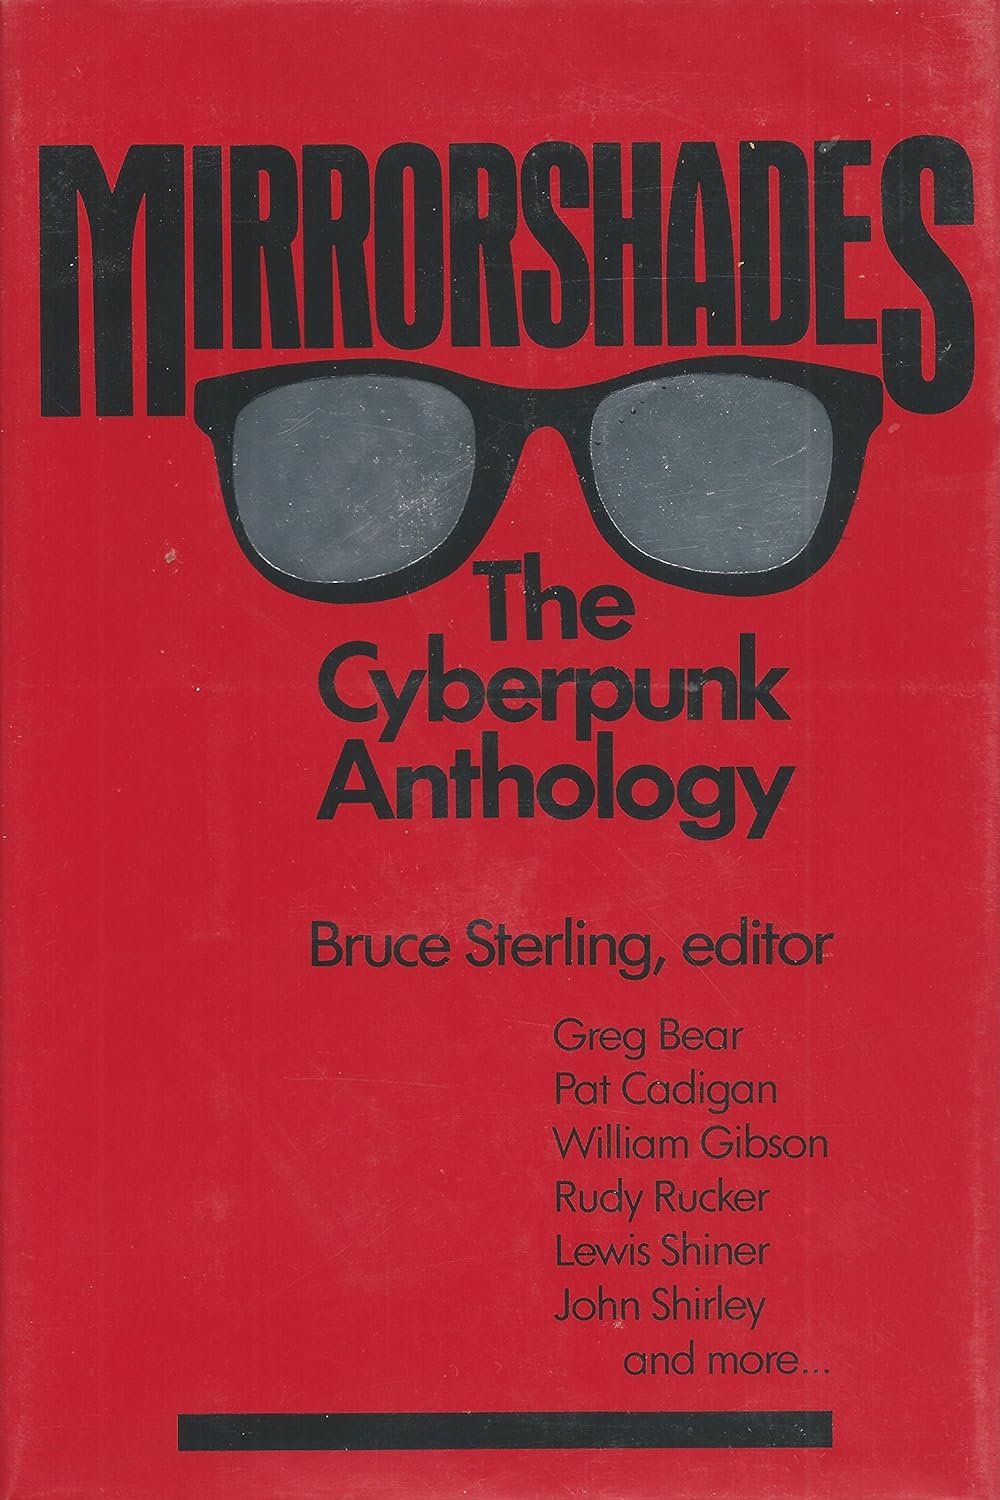 Mirrorshades (Edited) by Bruce Sterling (1986)